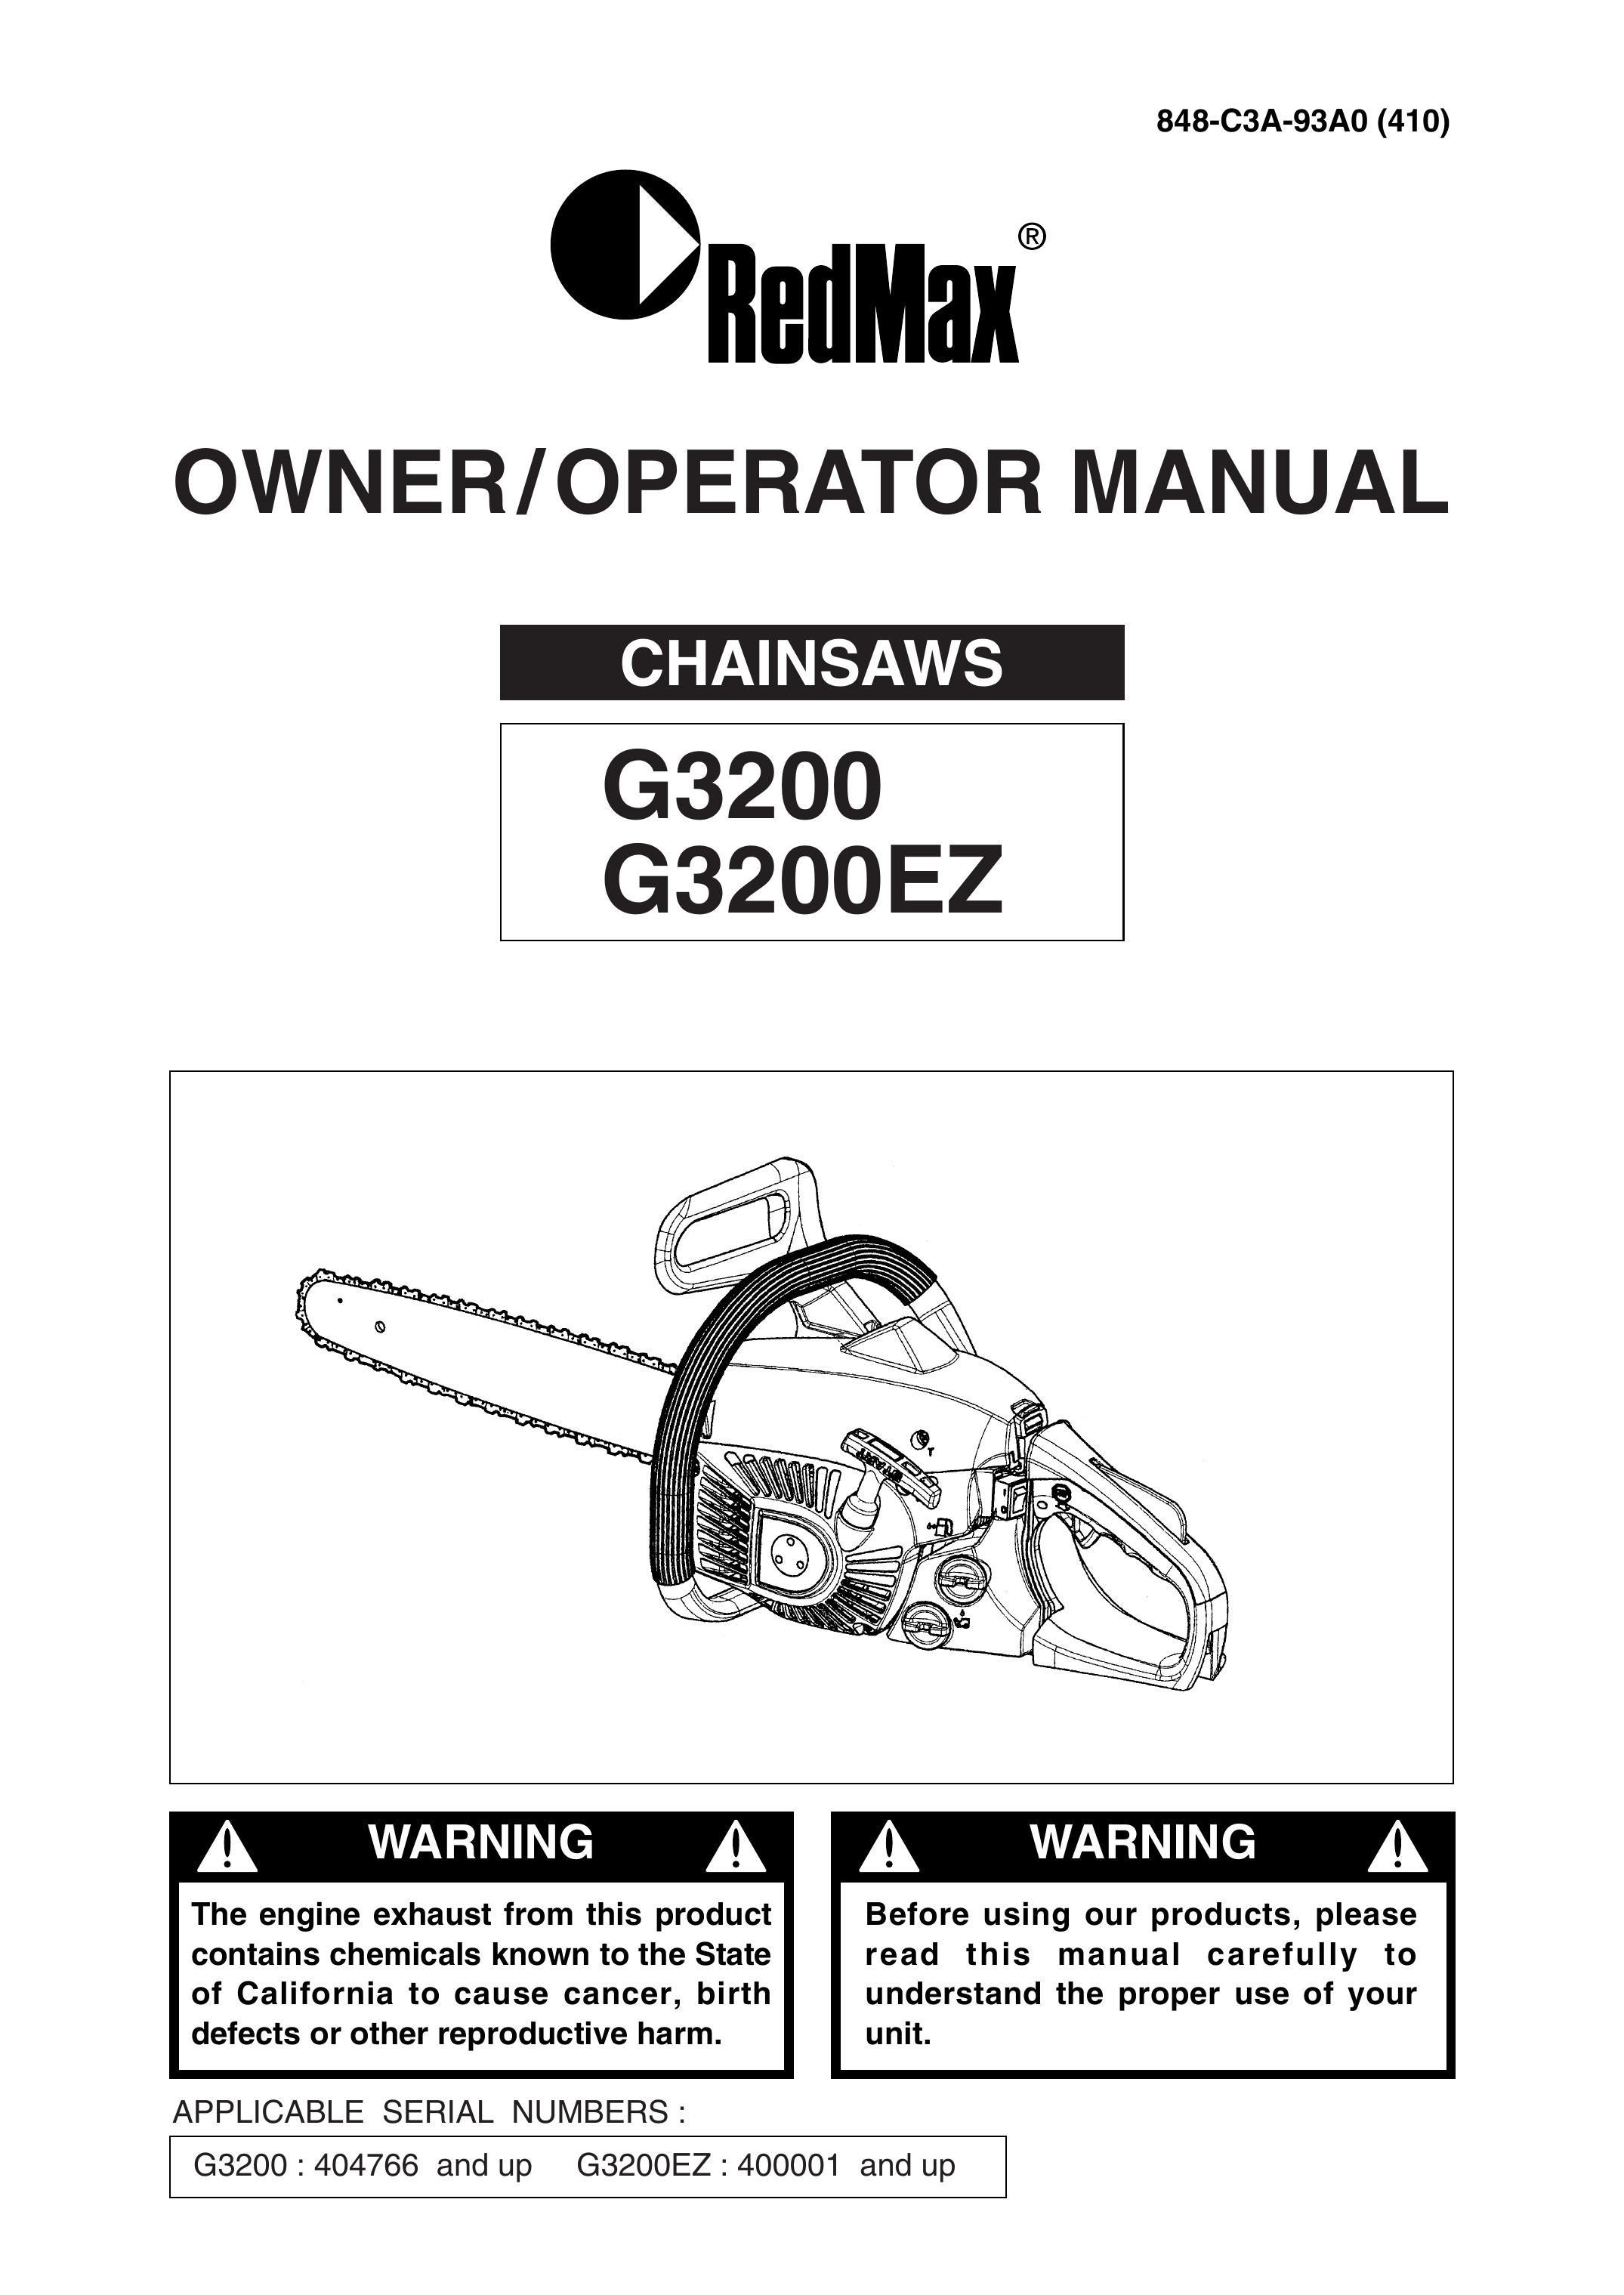 RedMax G3200EZ Chainsaw User Manual